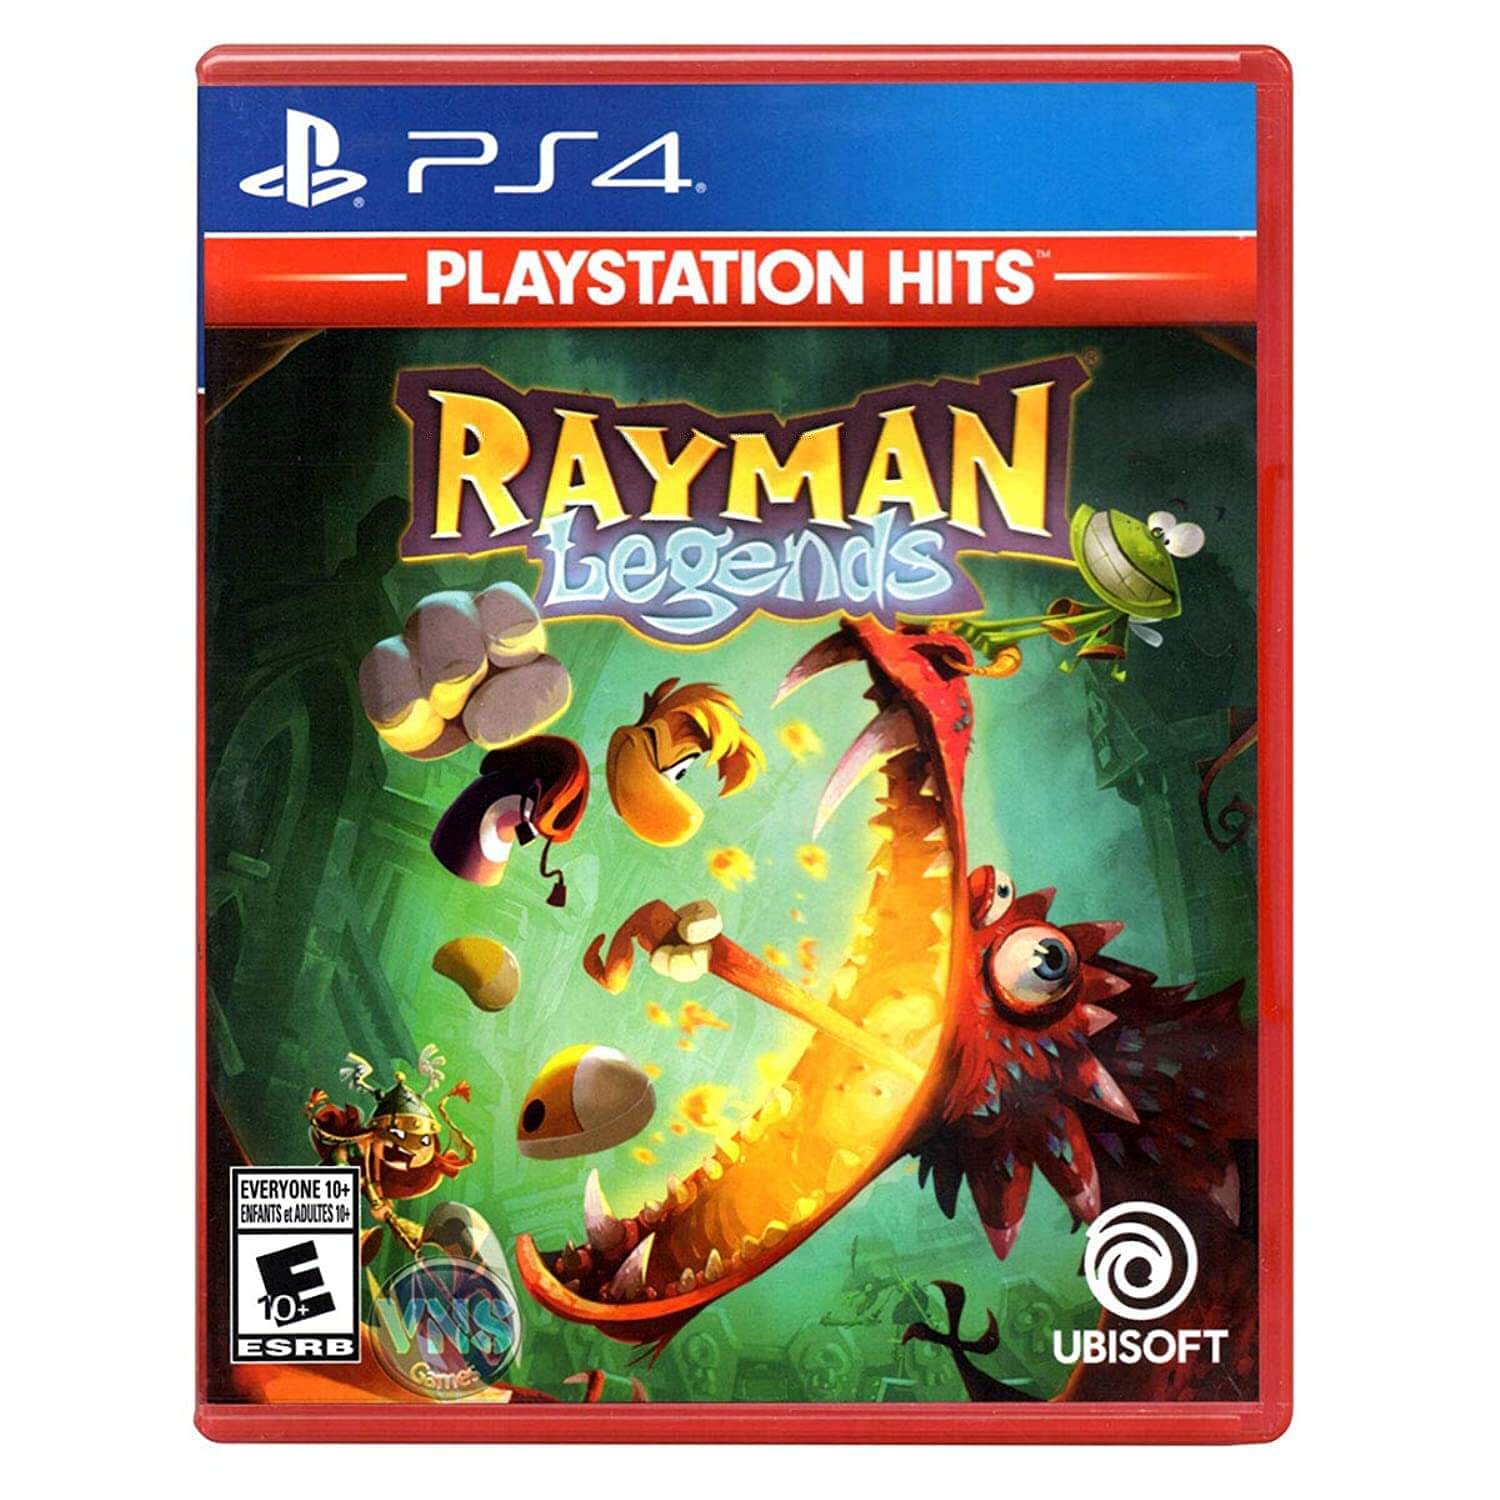 "Rayman Legends" for PS4